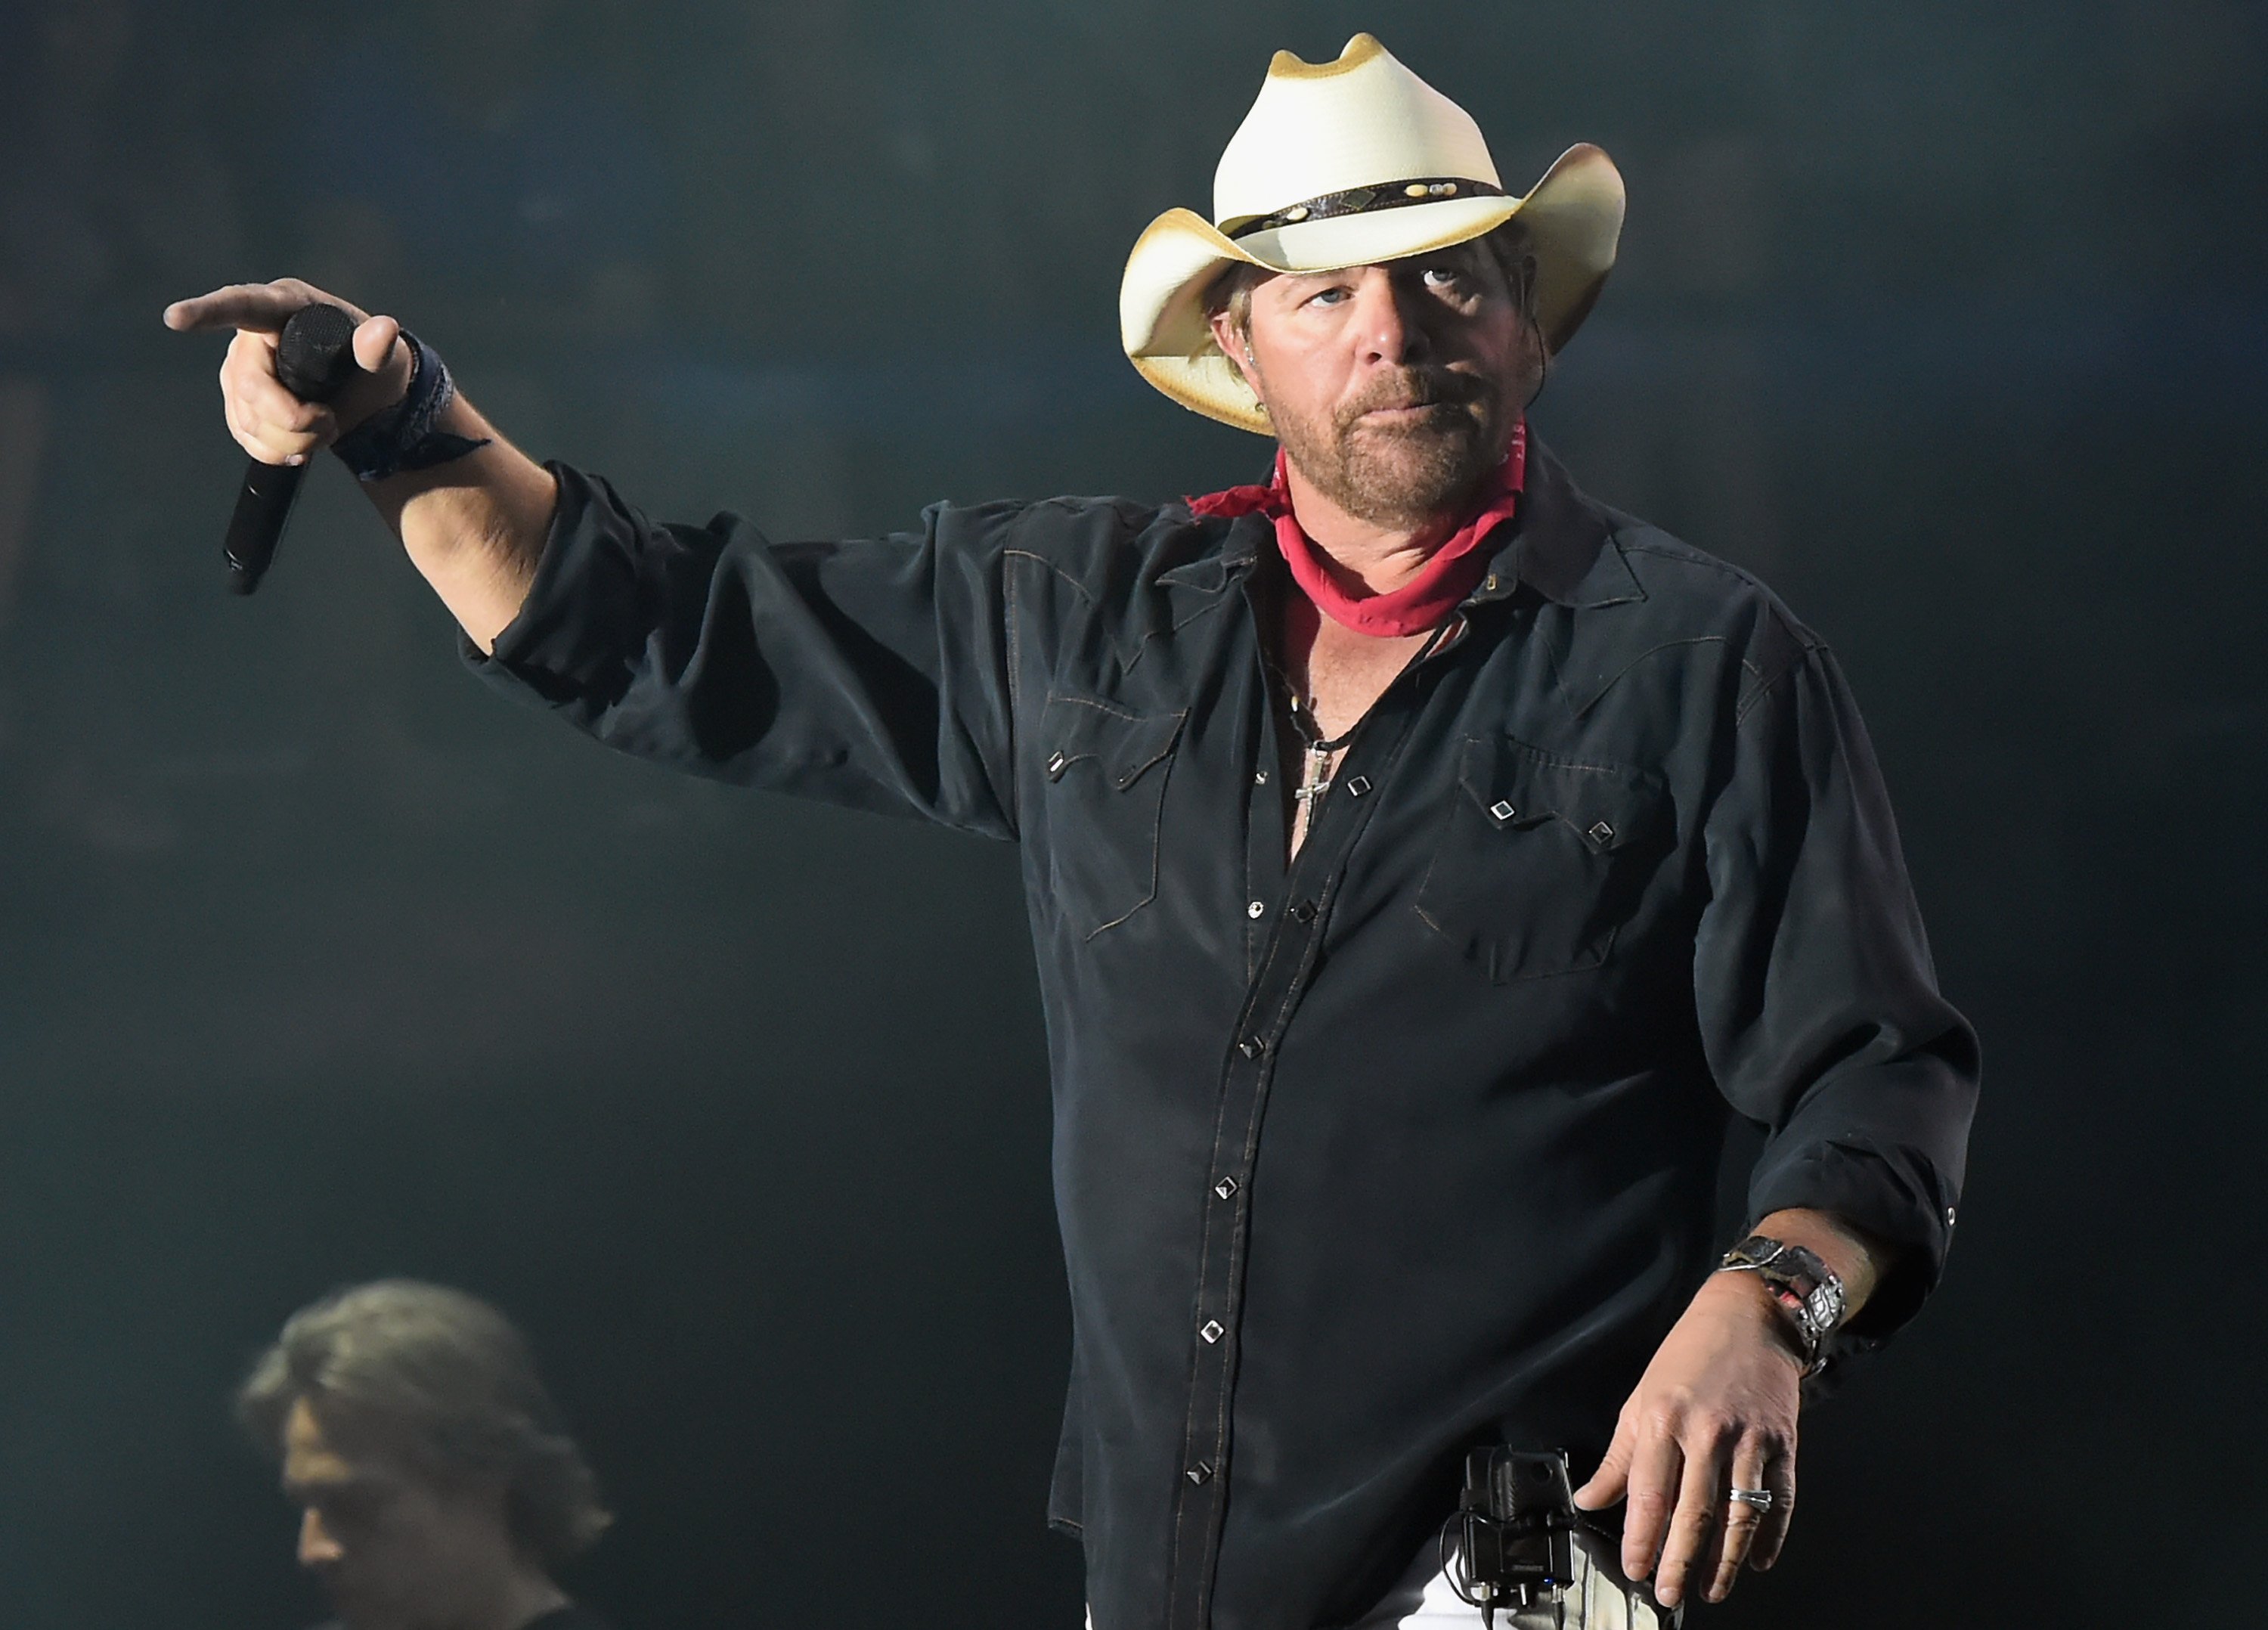 Toby Keith performs during Country Thunder Music Festival Arizona - Day 3 on April 7, 2018, in Florence, Arizona. | Source: Getty Images